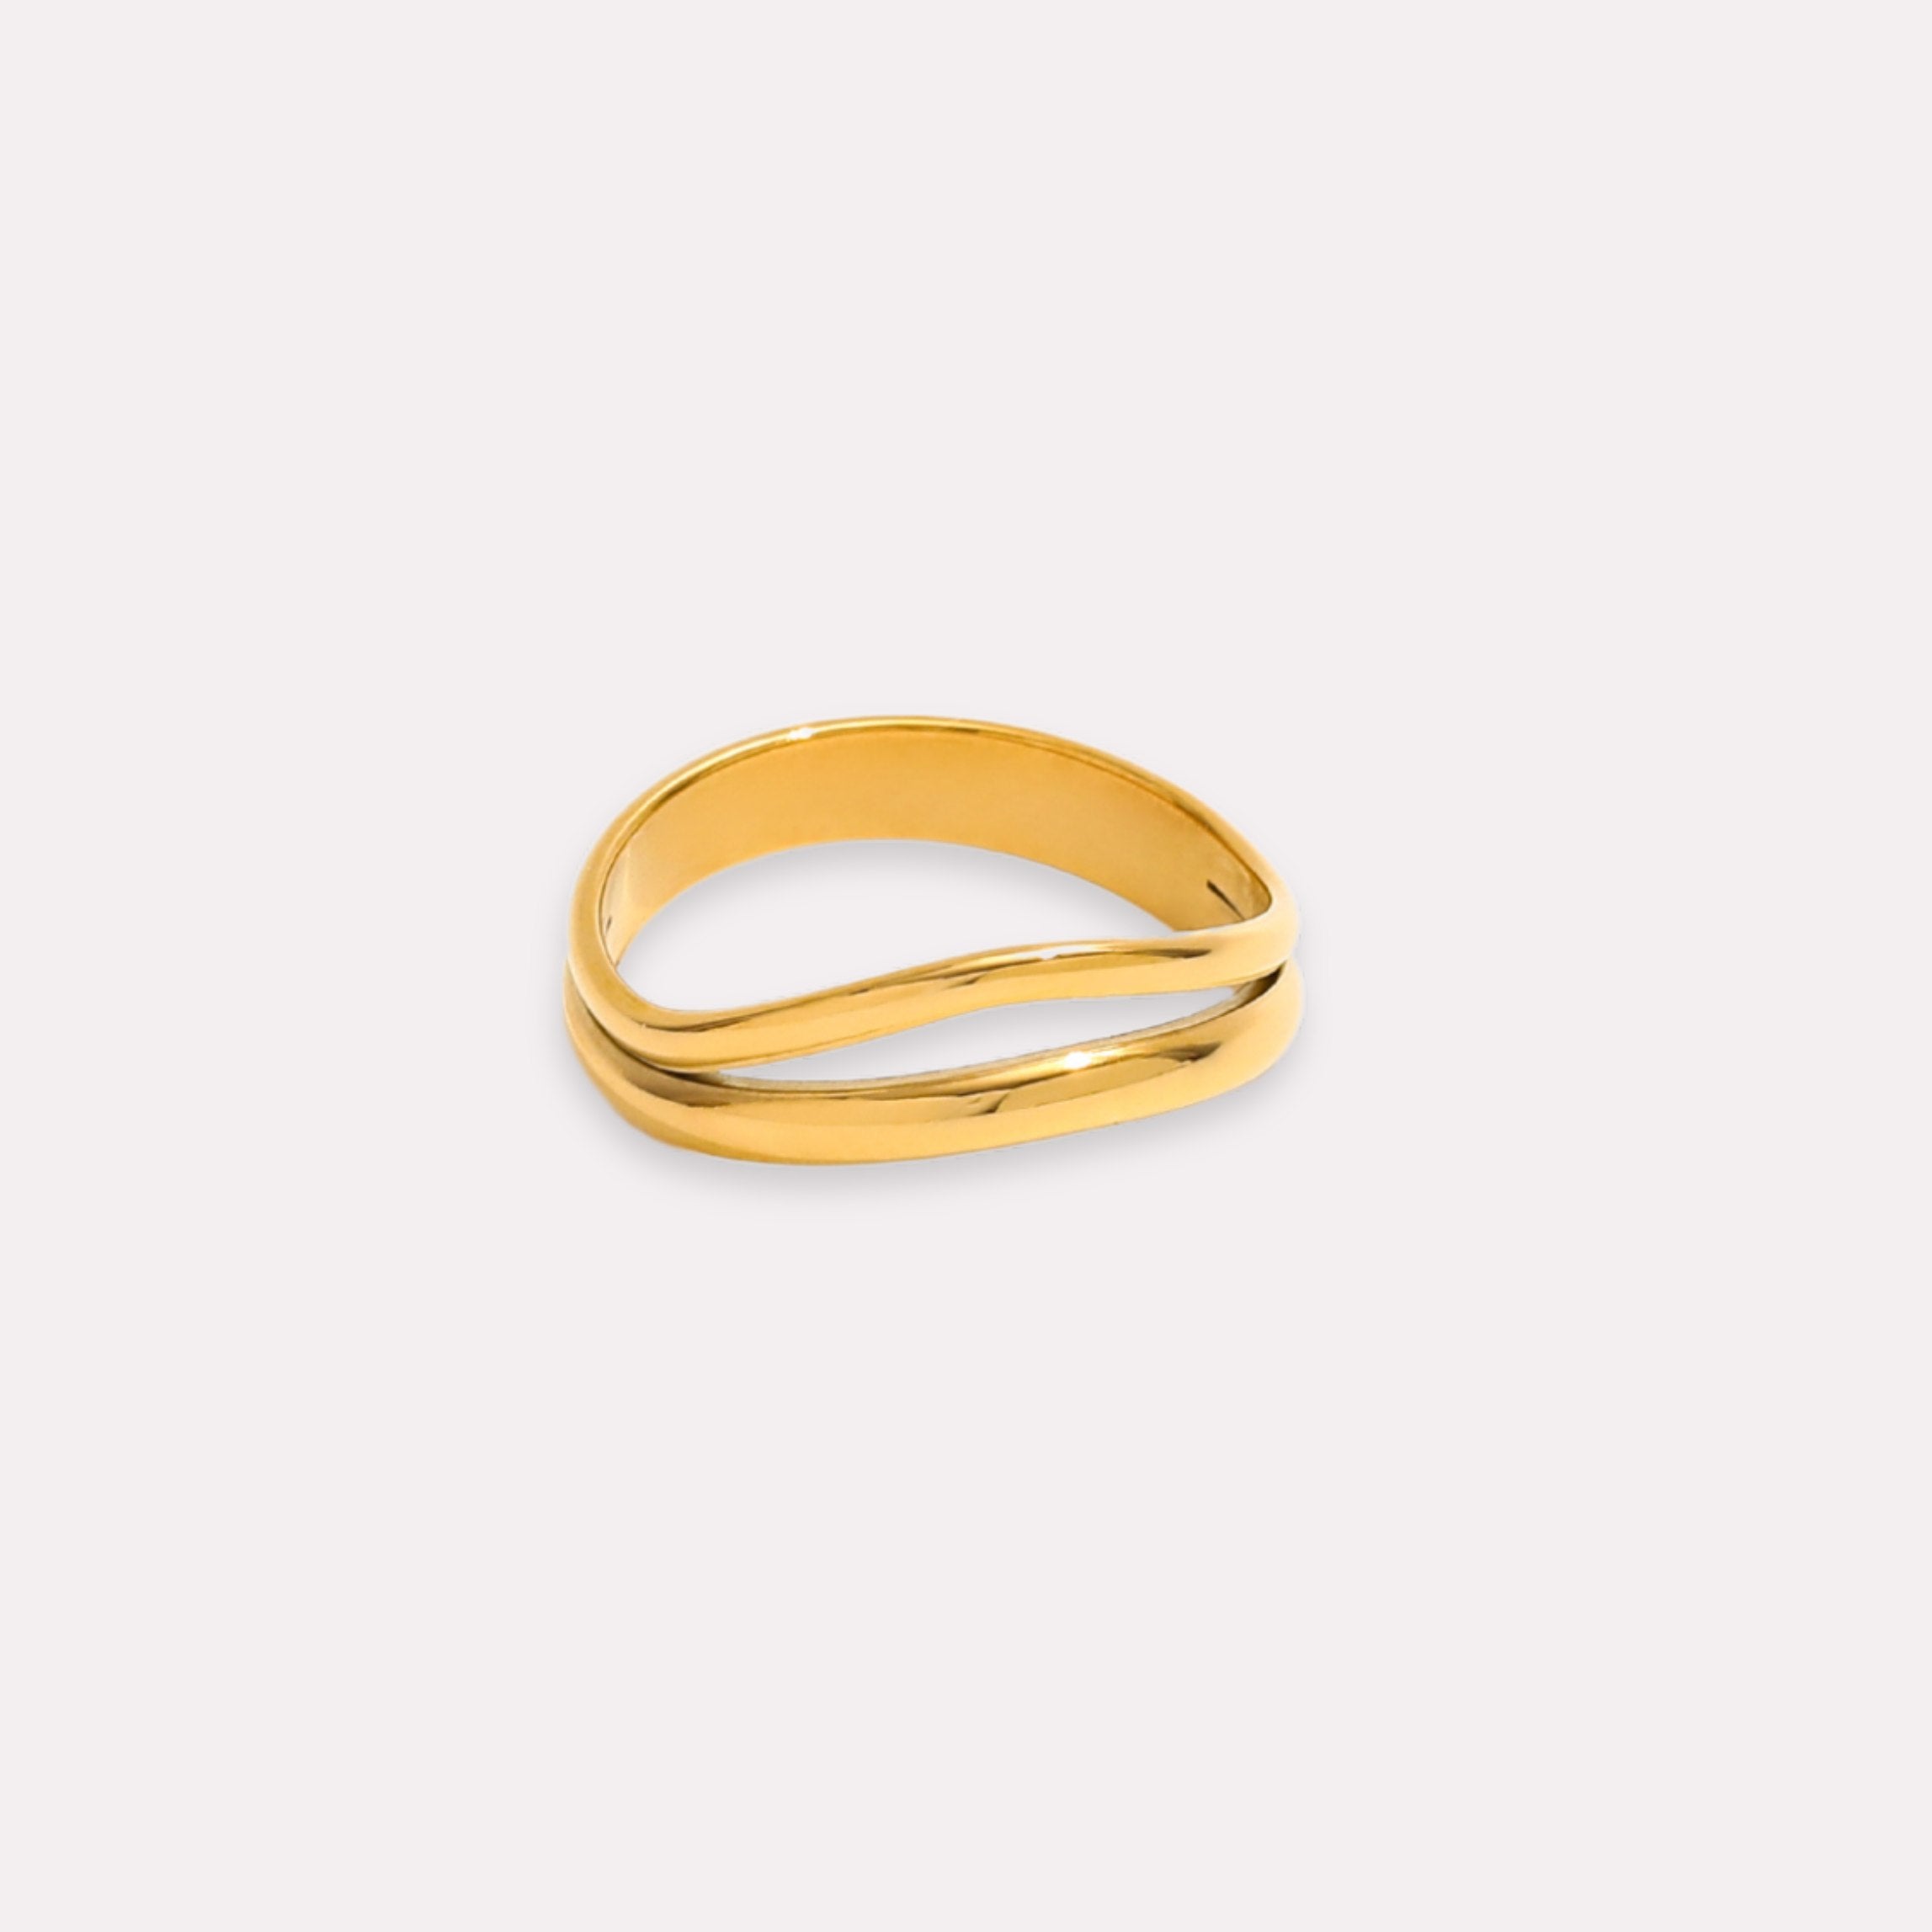 Double gold ring, waterproof rings